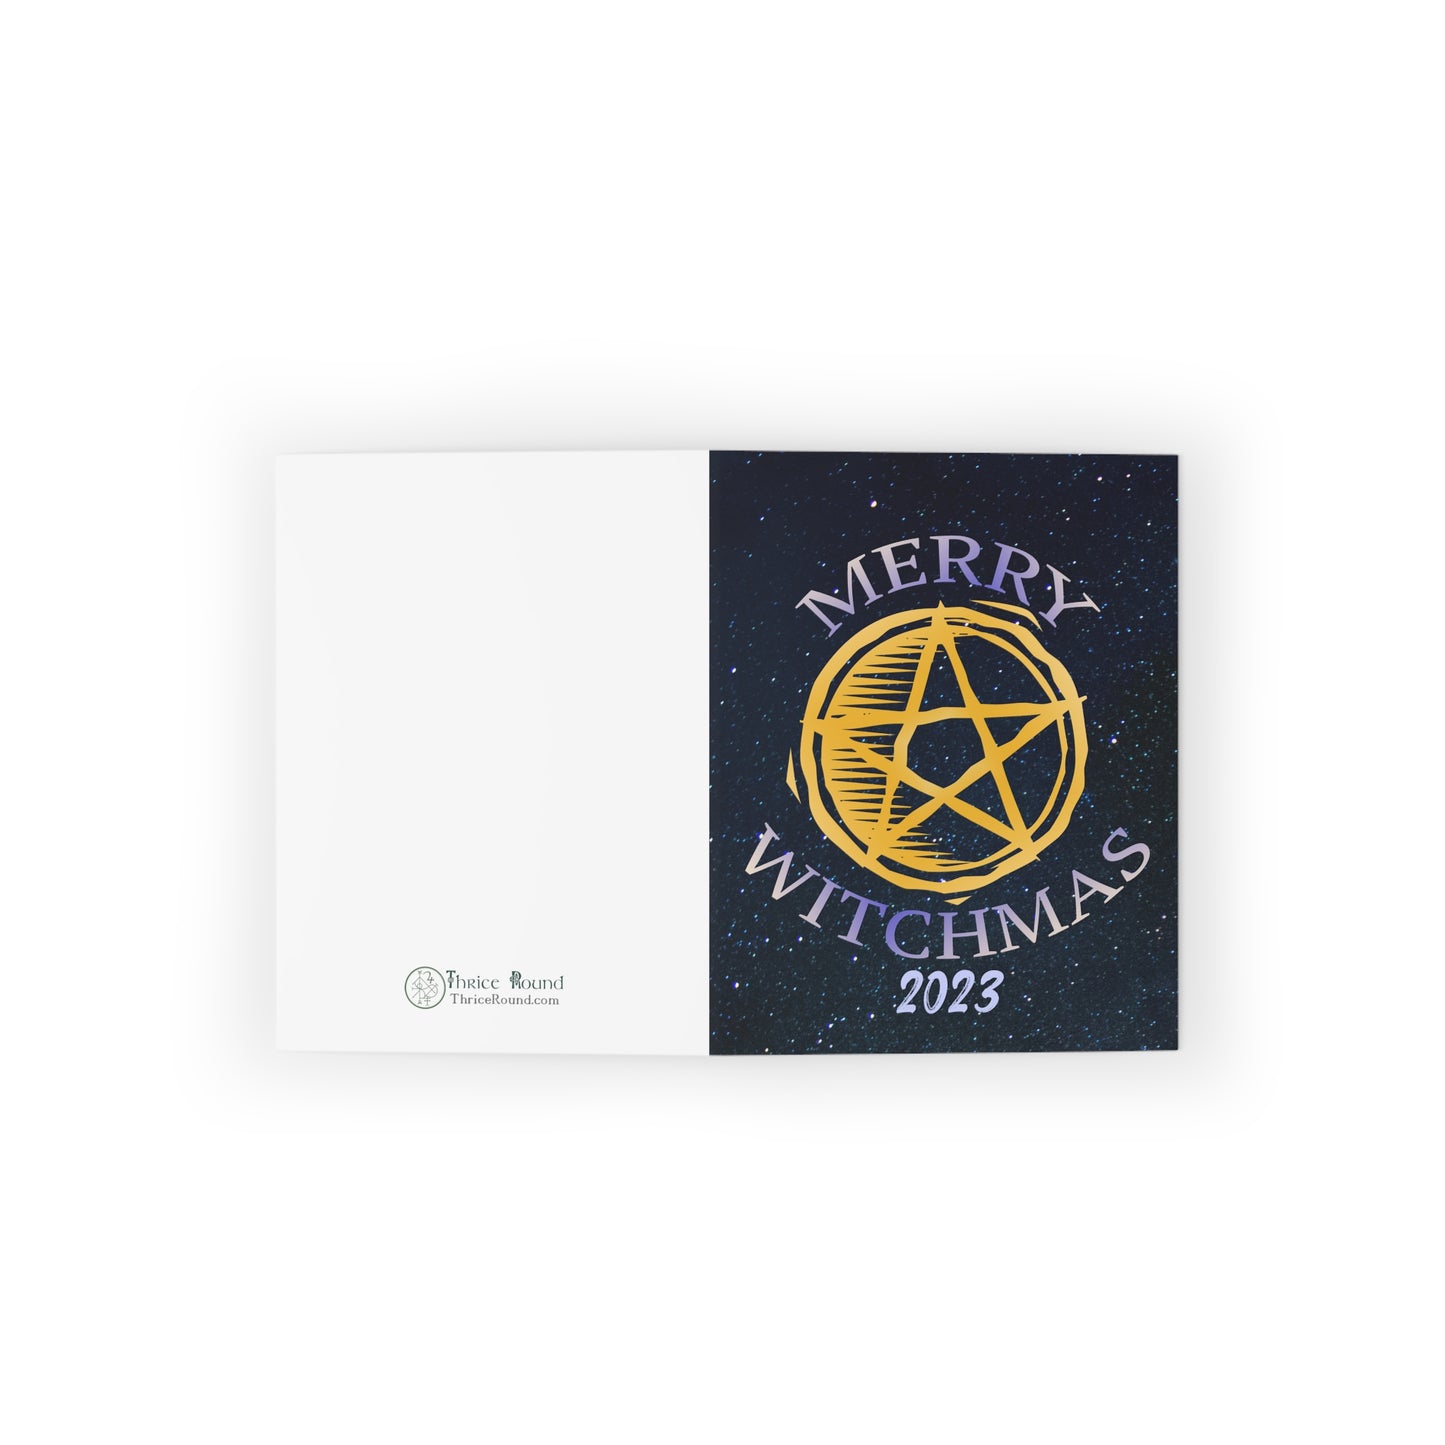 Merry Witchmas! | Yule Greeting Cards (8, 16, and 24 pcs)